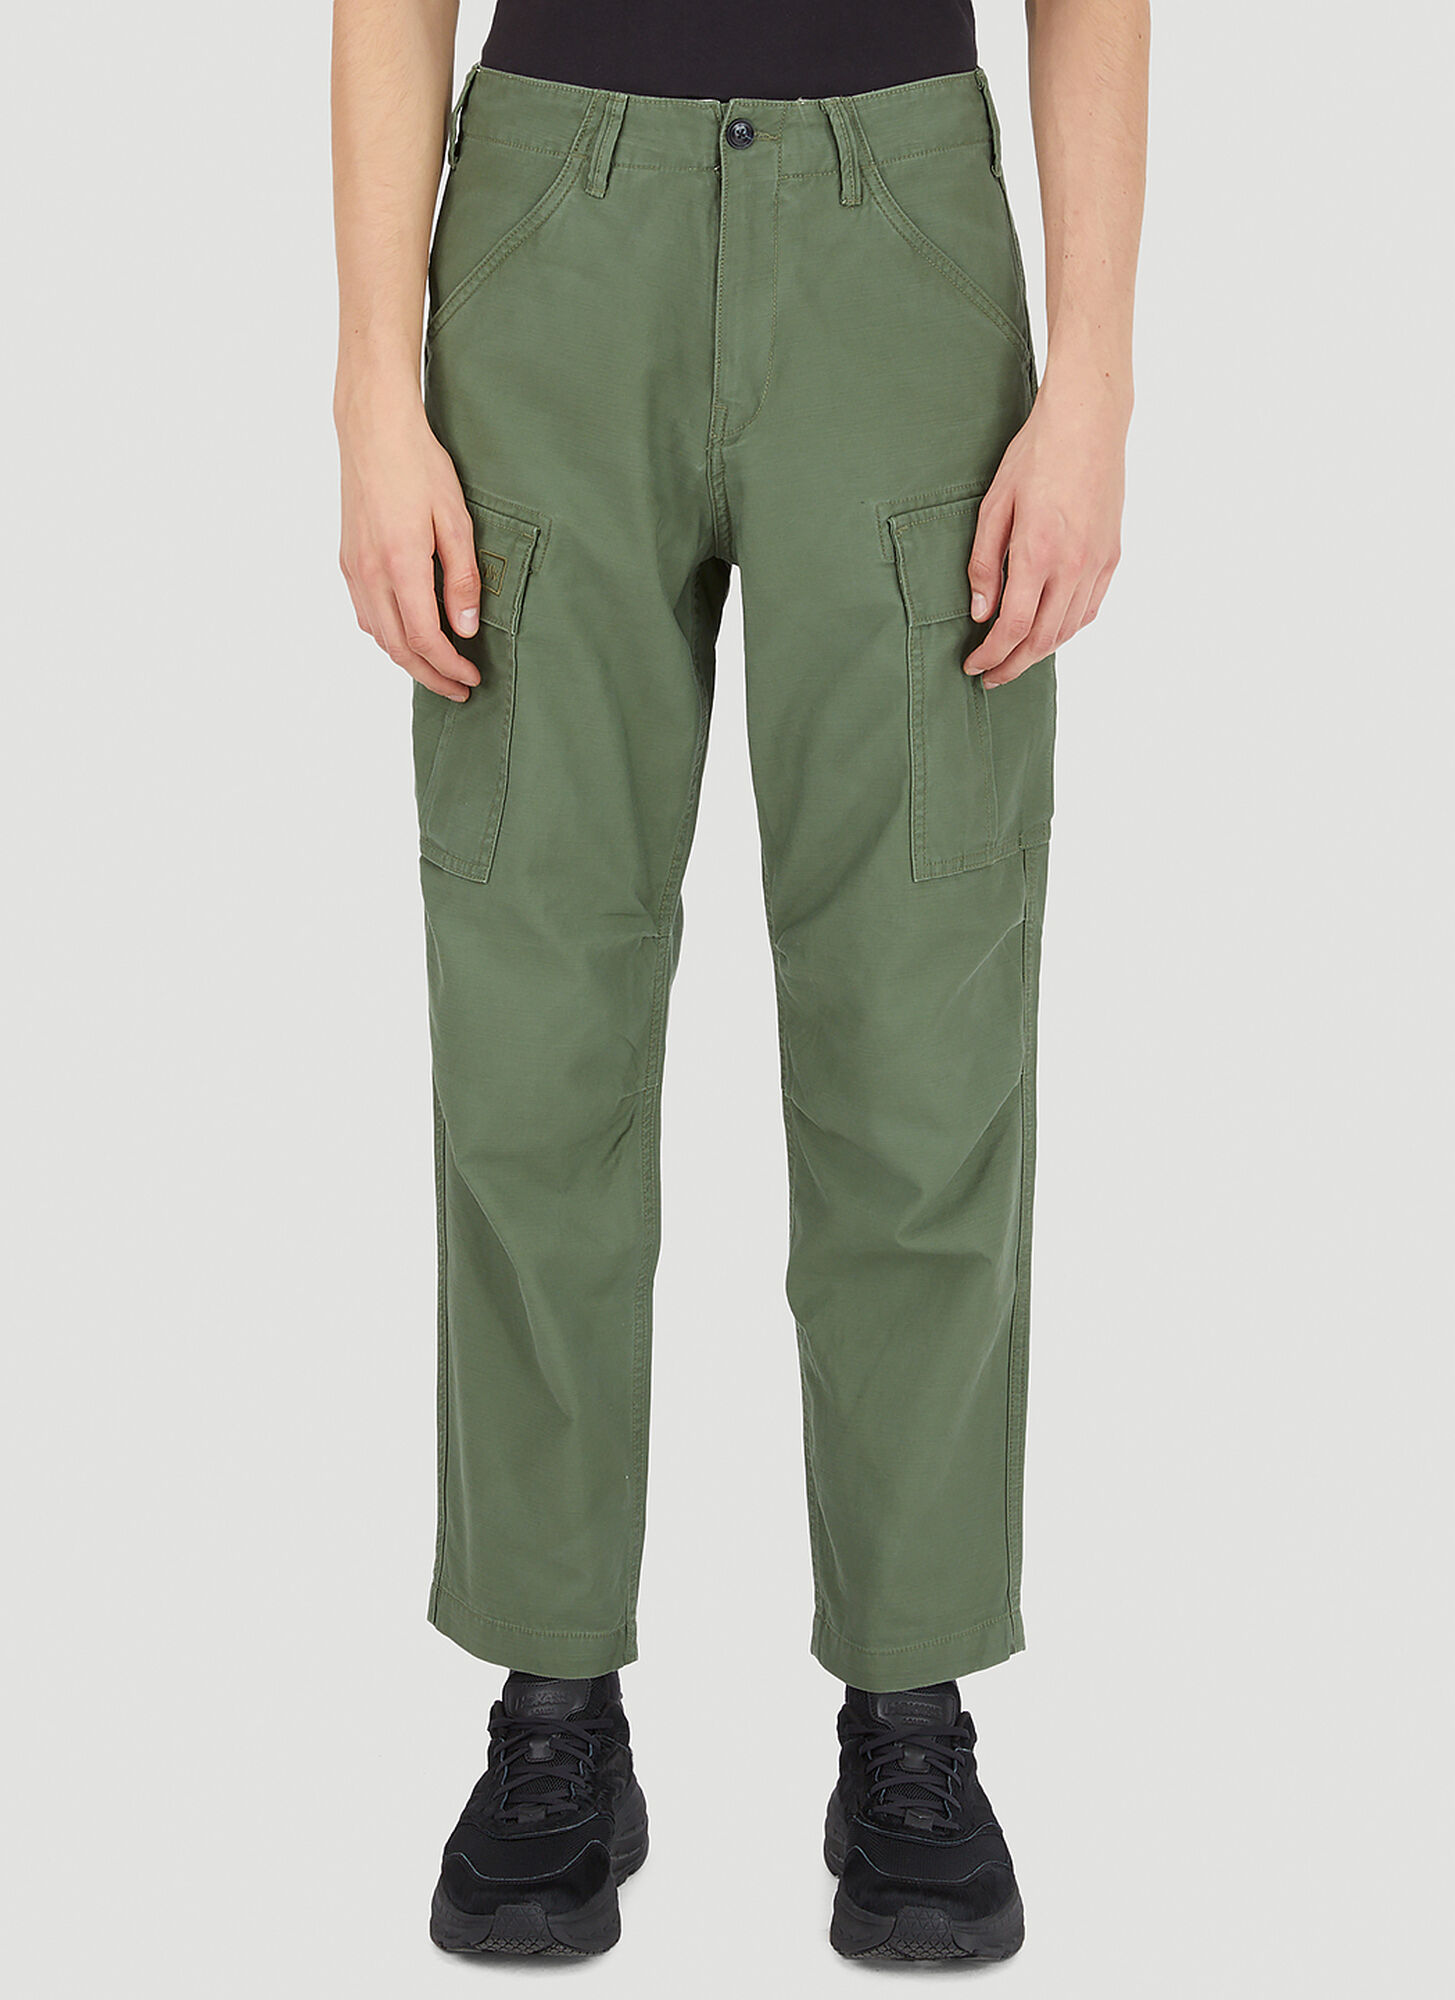 Liberaiders Six Pocket Army Pants In Green